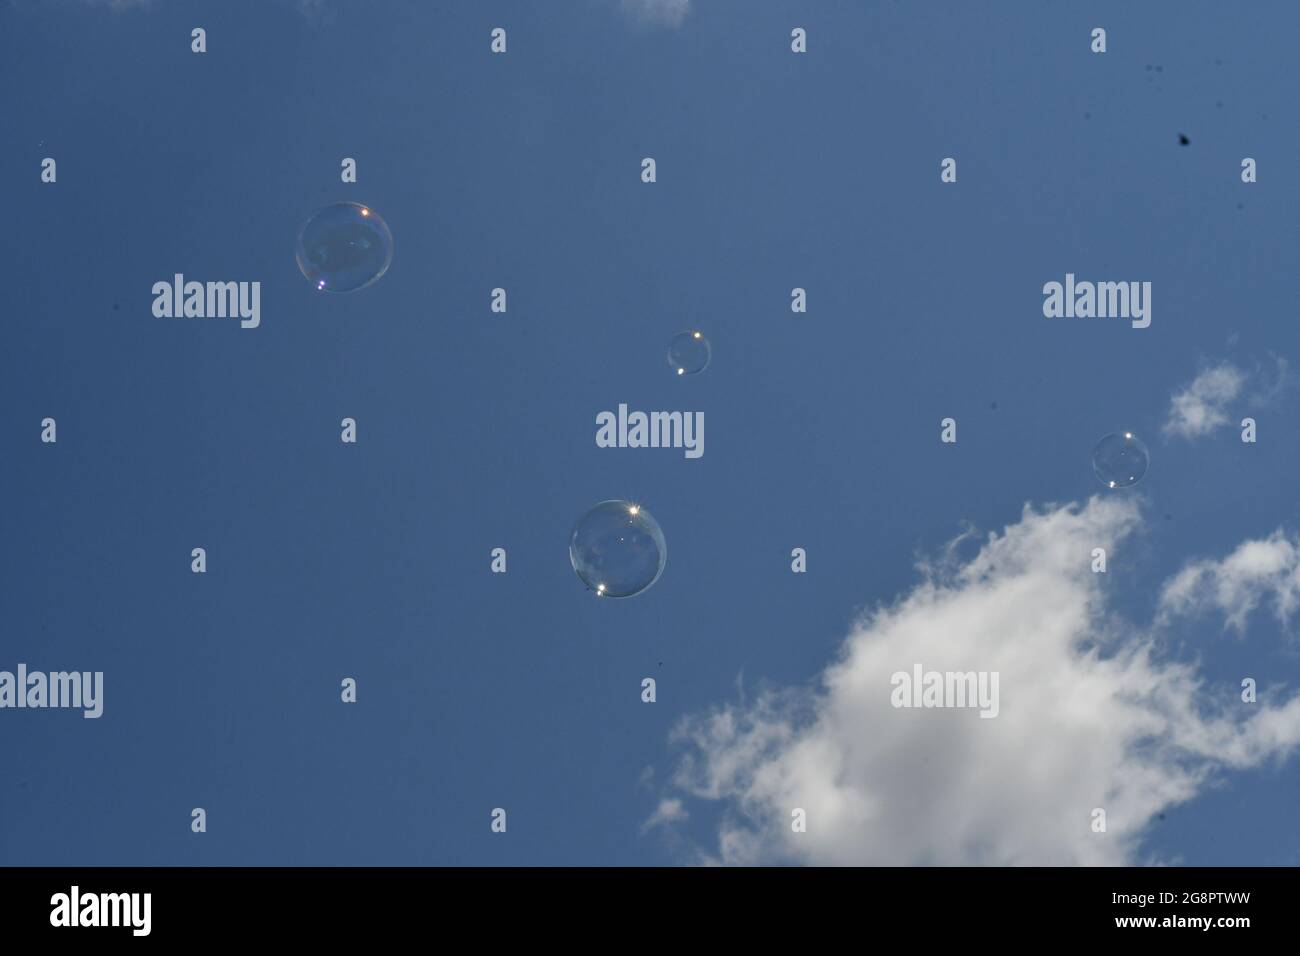 Four bubbles floating against a light blue sky with passing clouds Stock Photo